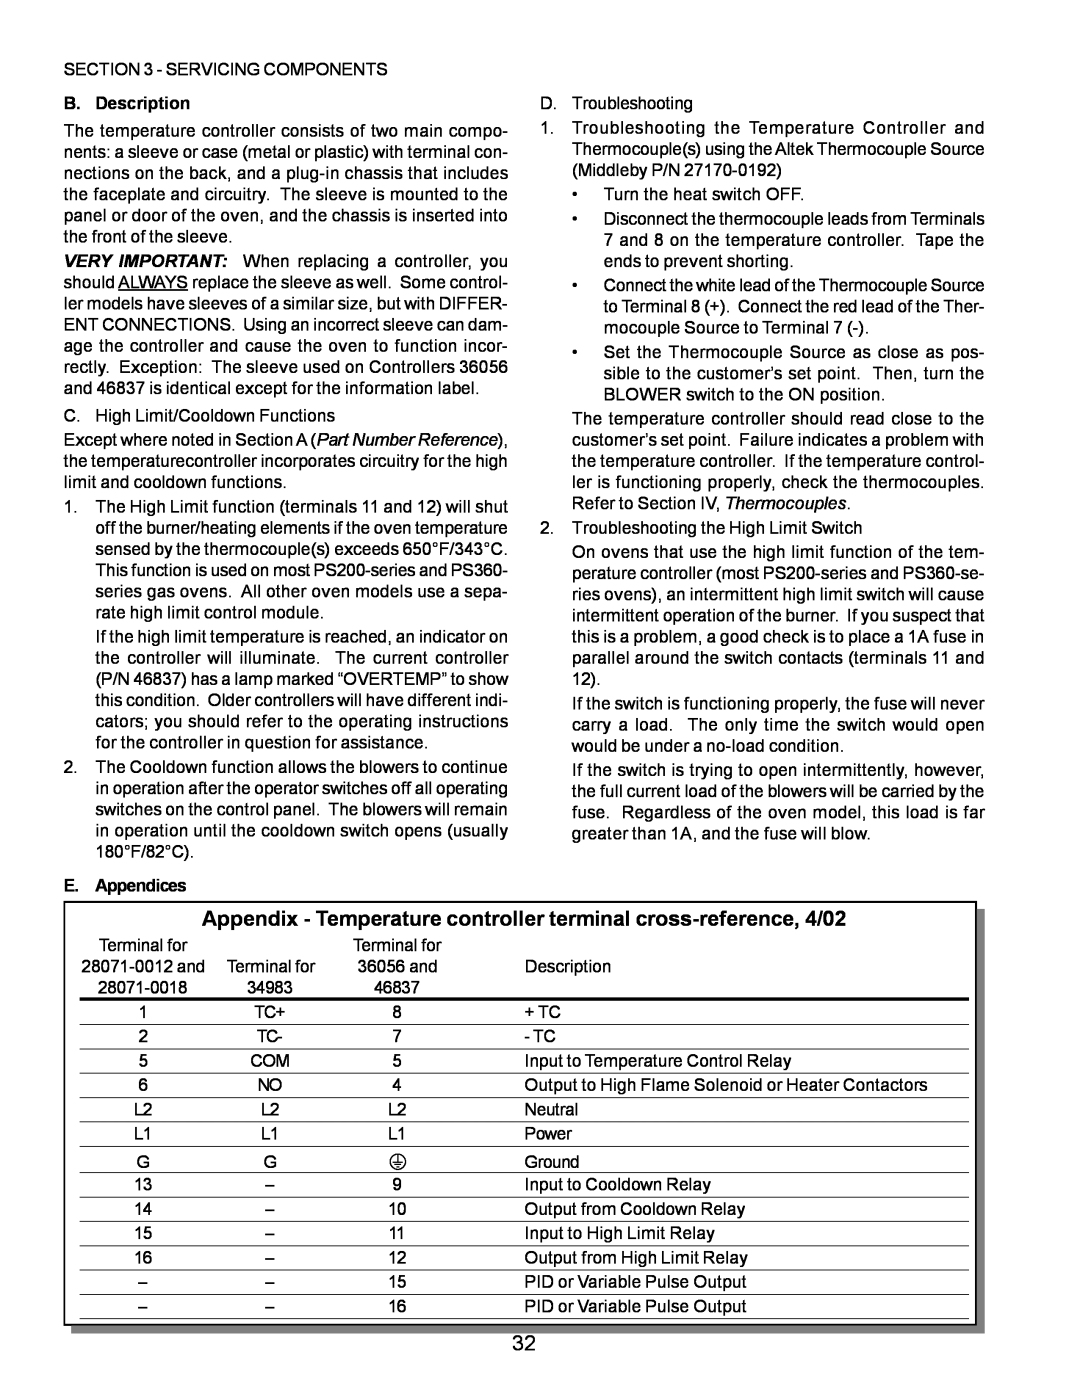 Middleby Marshall PS555 Appendix - Temperature controller terminal cross-reference, 4/02, B. Description, E. Appendices 